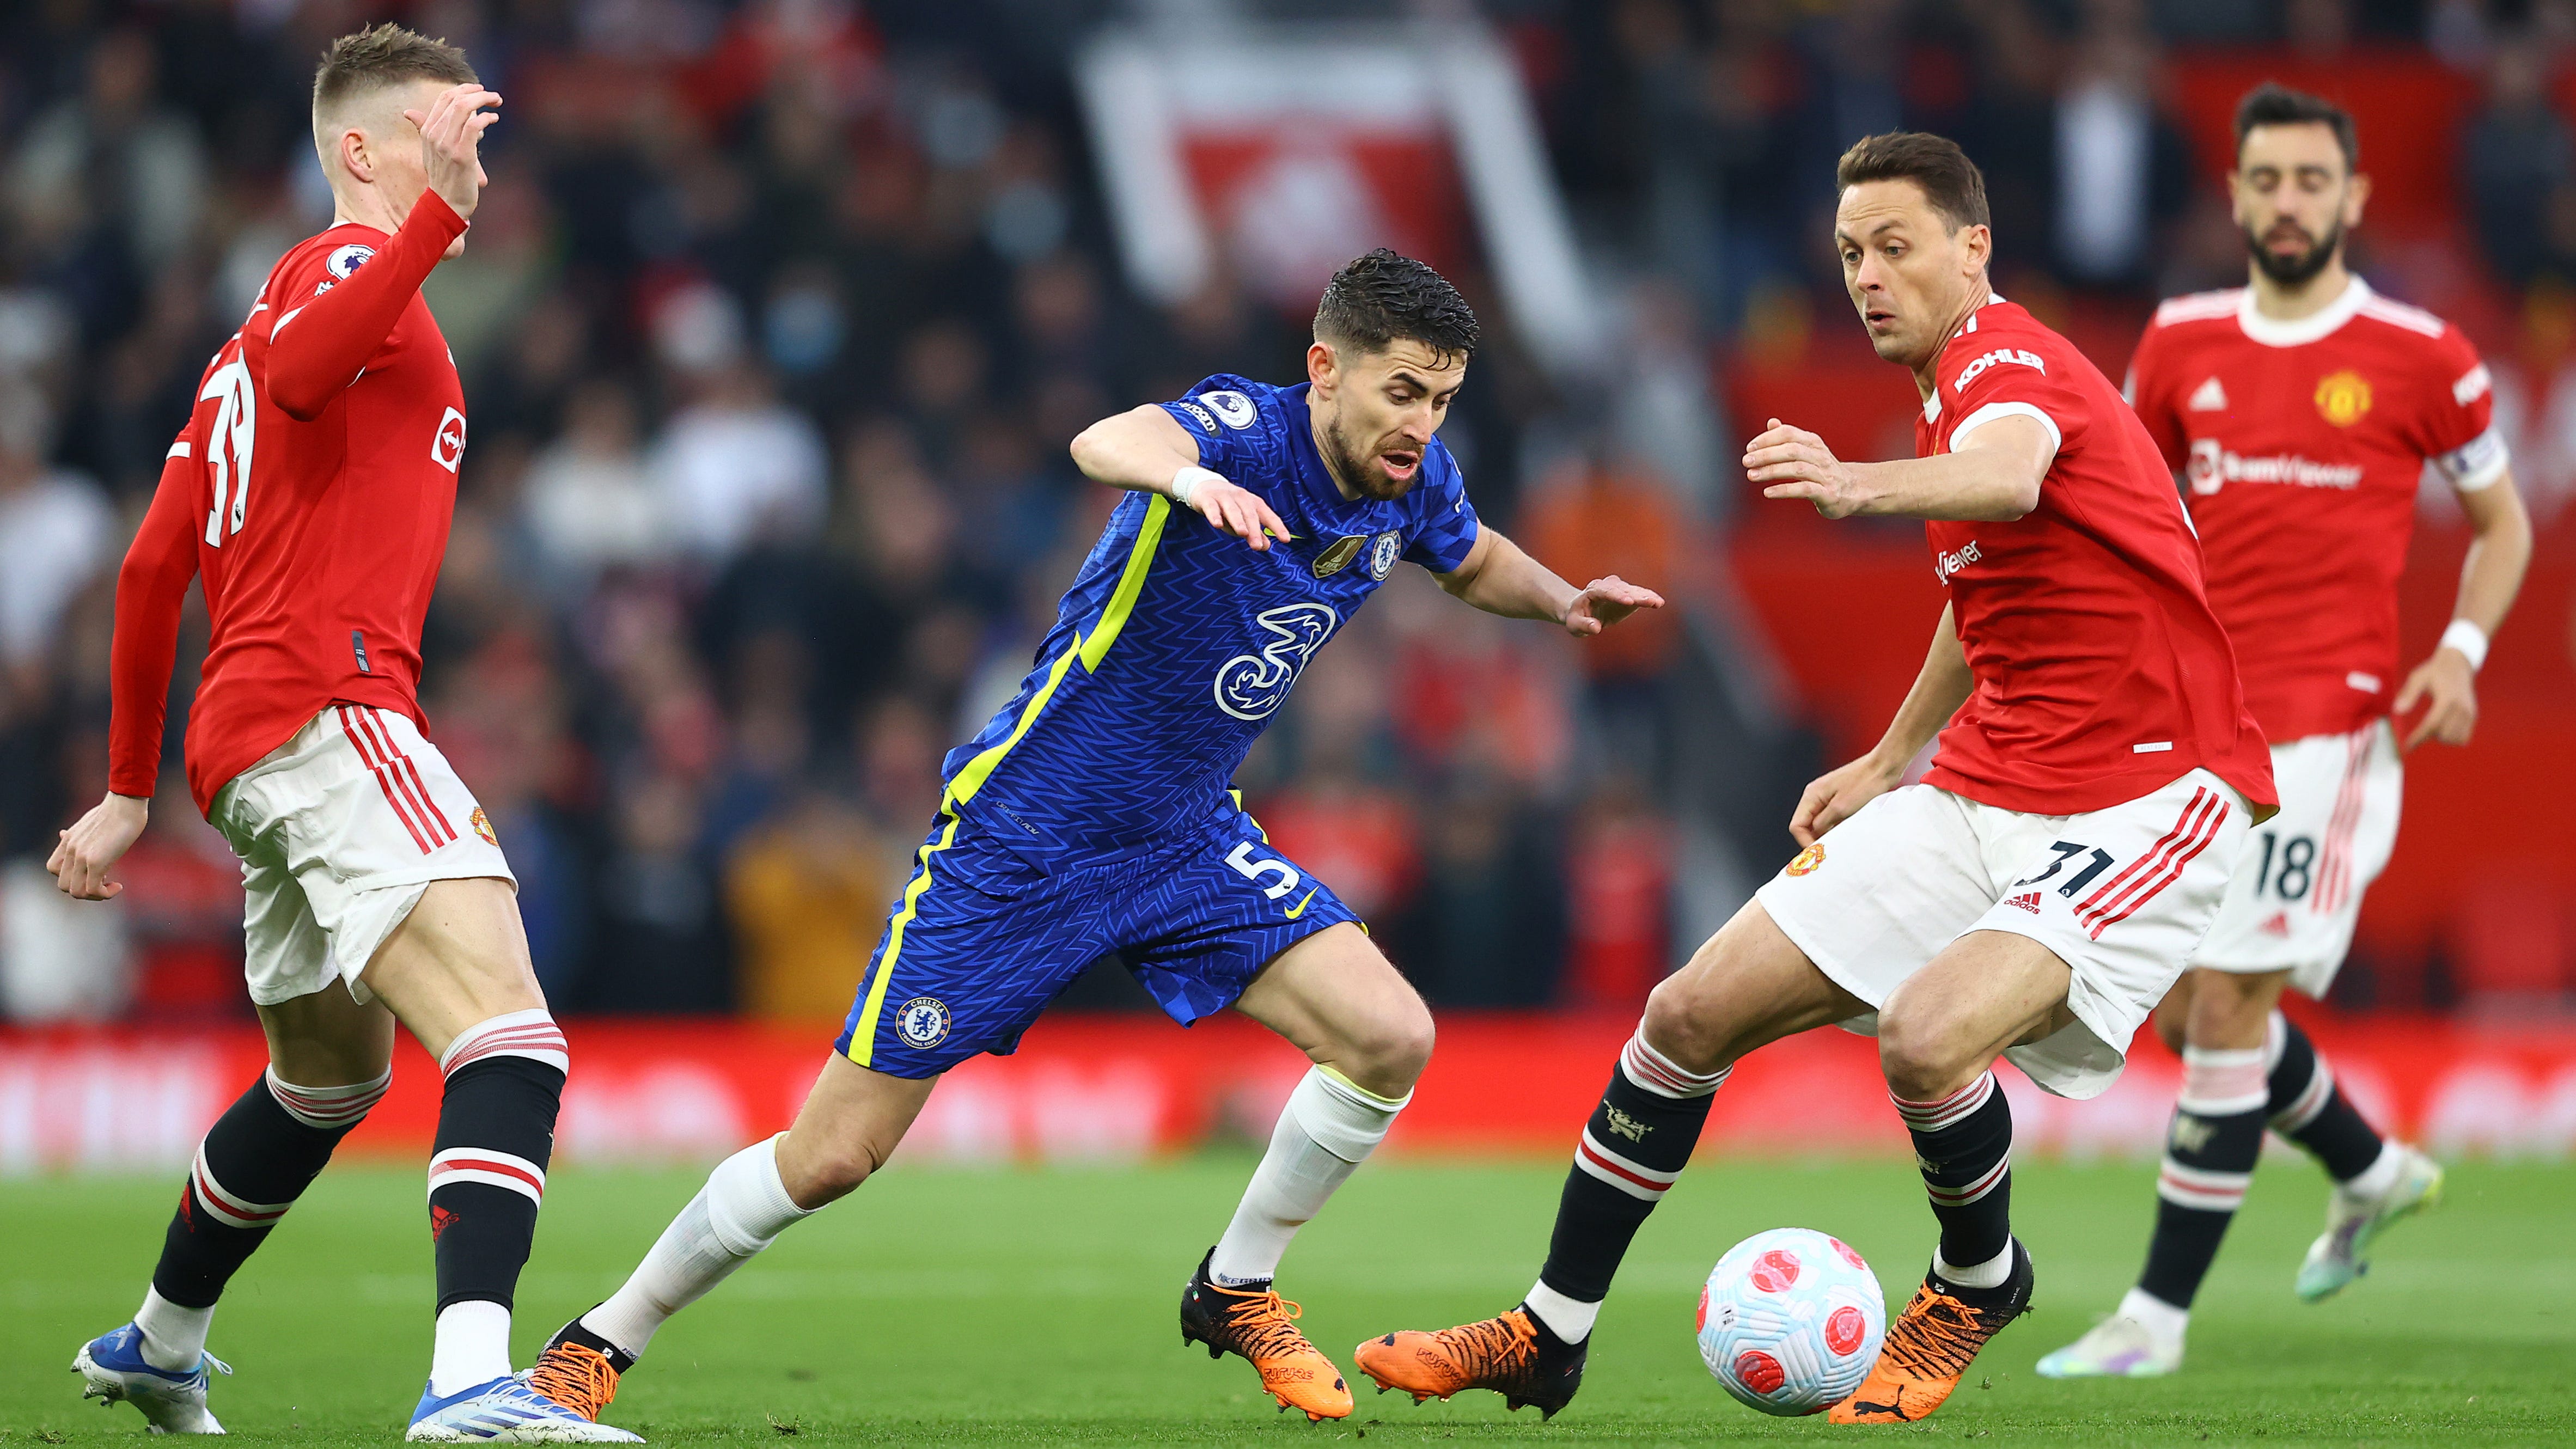 Chelsea vs Manchester United Lineups and LIVE updates